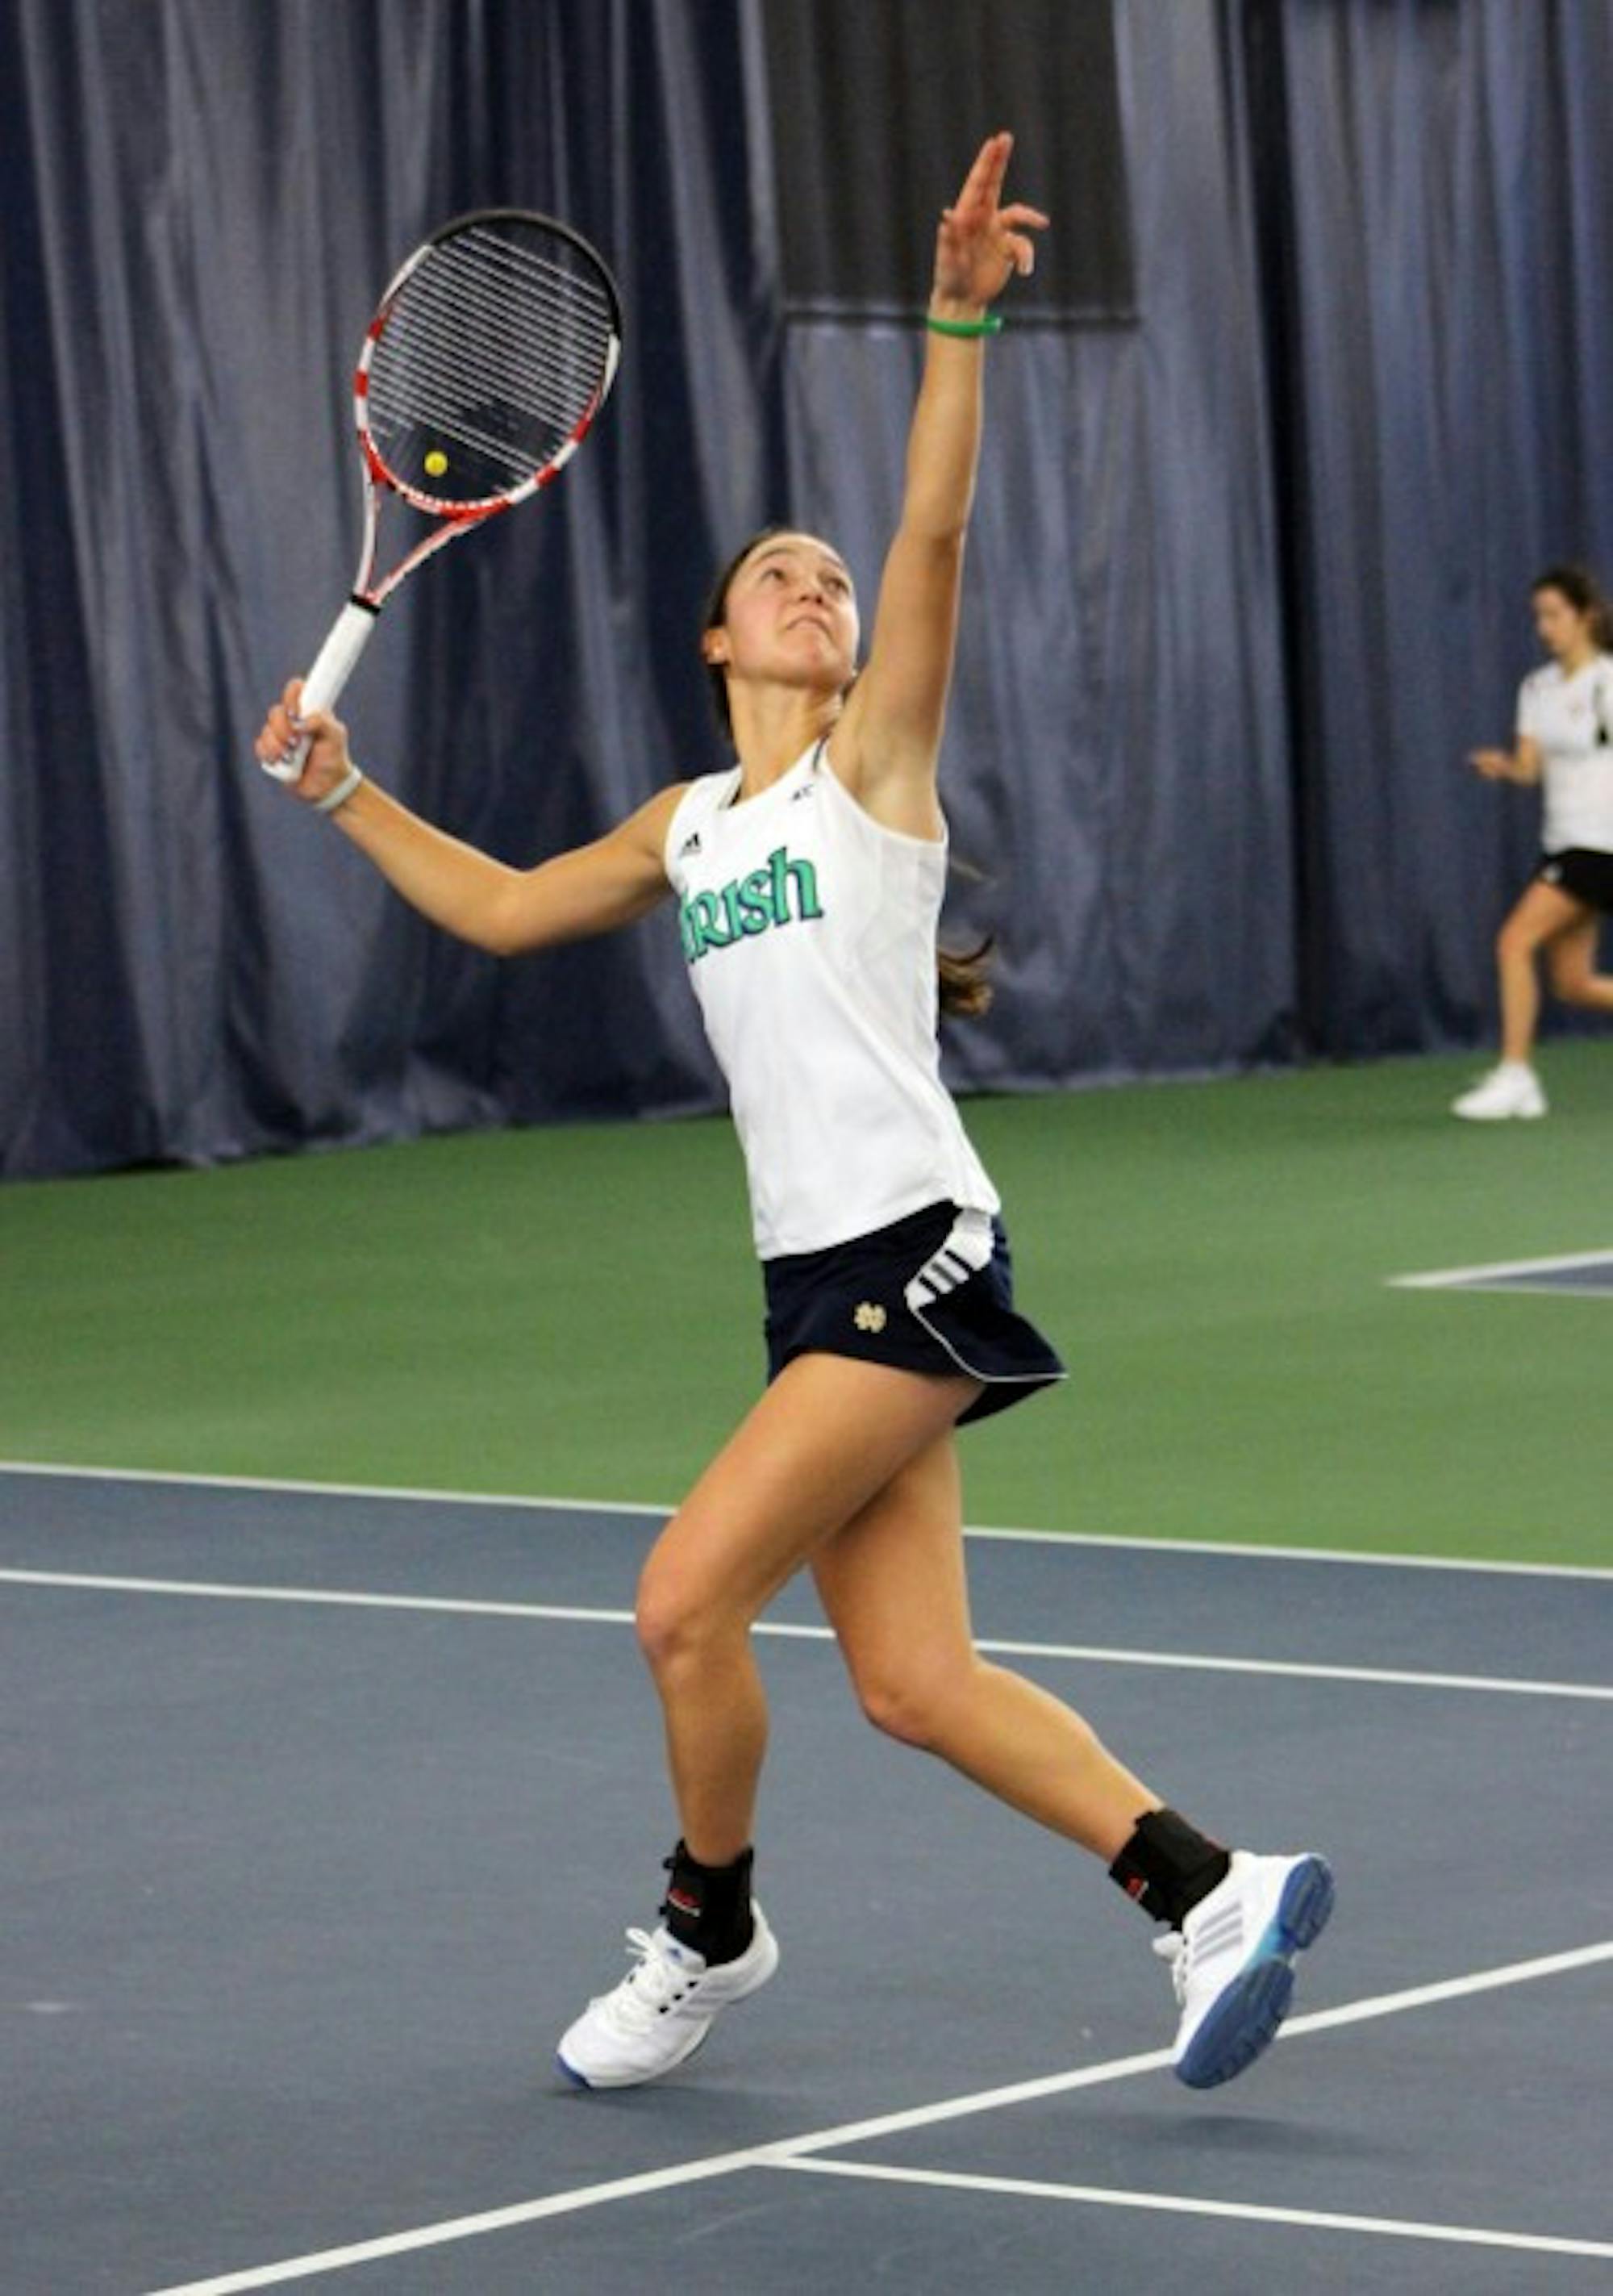 Irish junior Quinn Gleason tracks the ball during Notre Dame’s 4-3 victory over Indiana on Feb. 2 at Eck Tennis Center. Gleason won her singles match but lost her doubles competition against the Hoosiers.